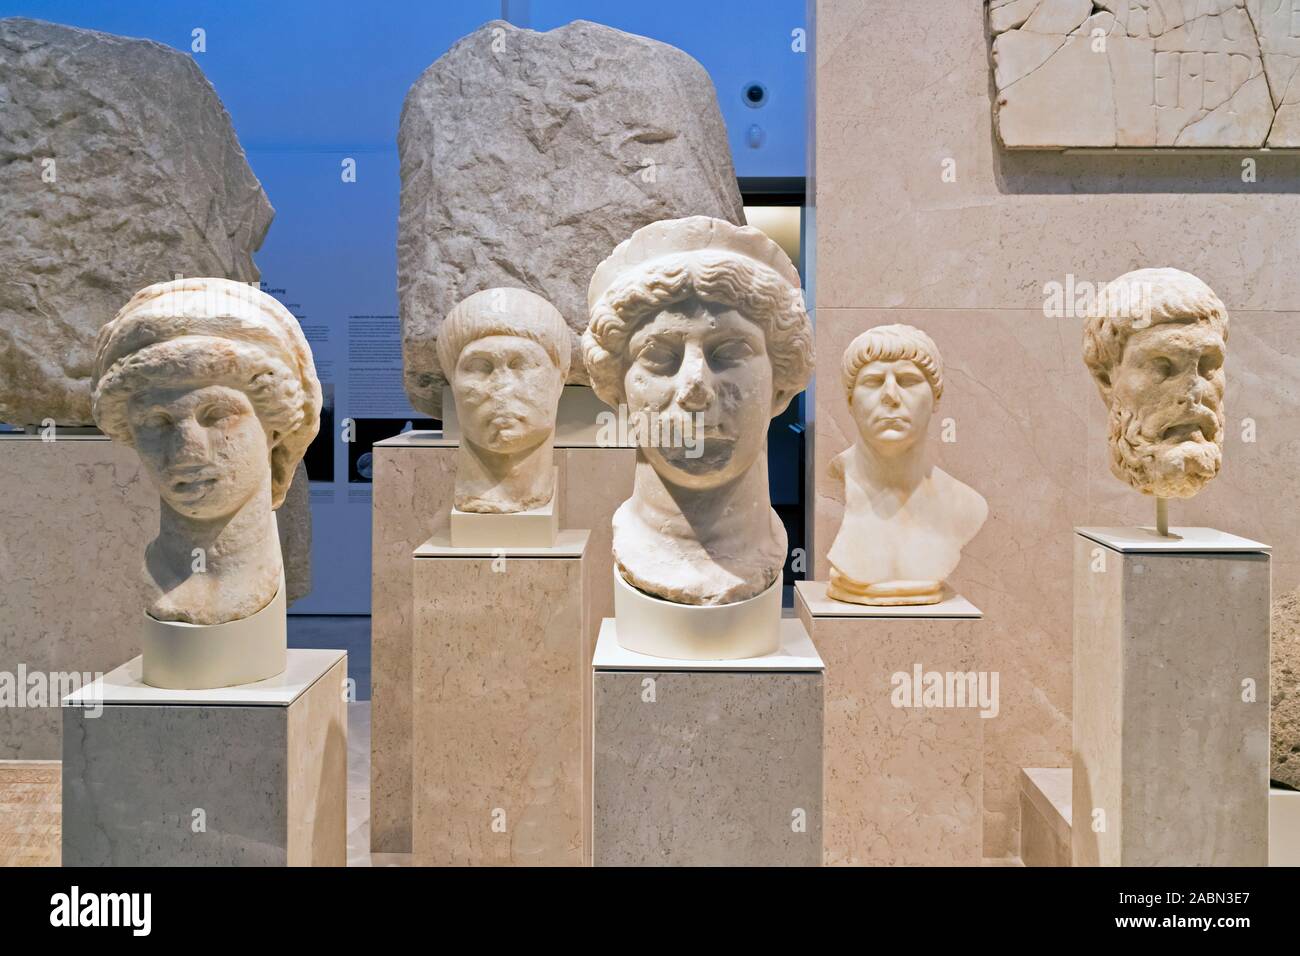 Collection of marble heads, dating from the first and second centuries AD of the Roman era. Exhibited in the Malaga Museum in the Palacio de la Aduana Stock Photo